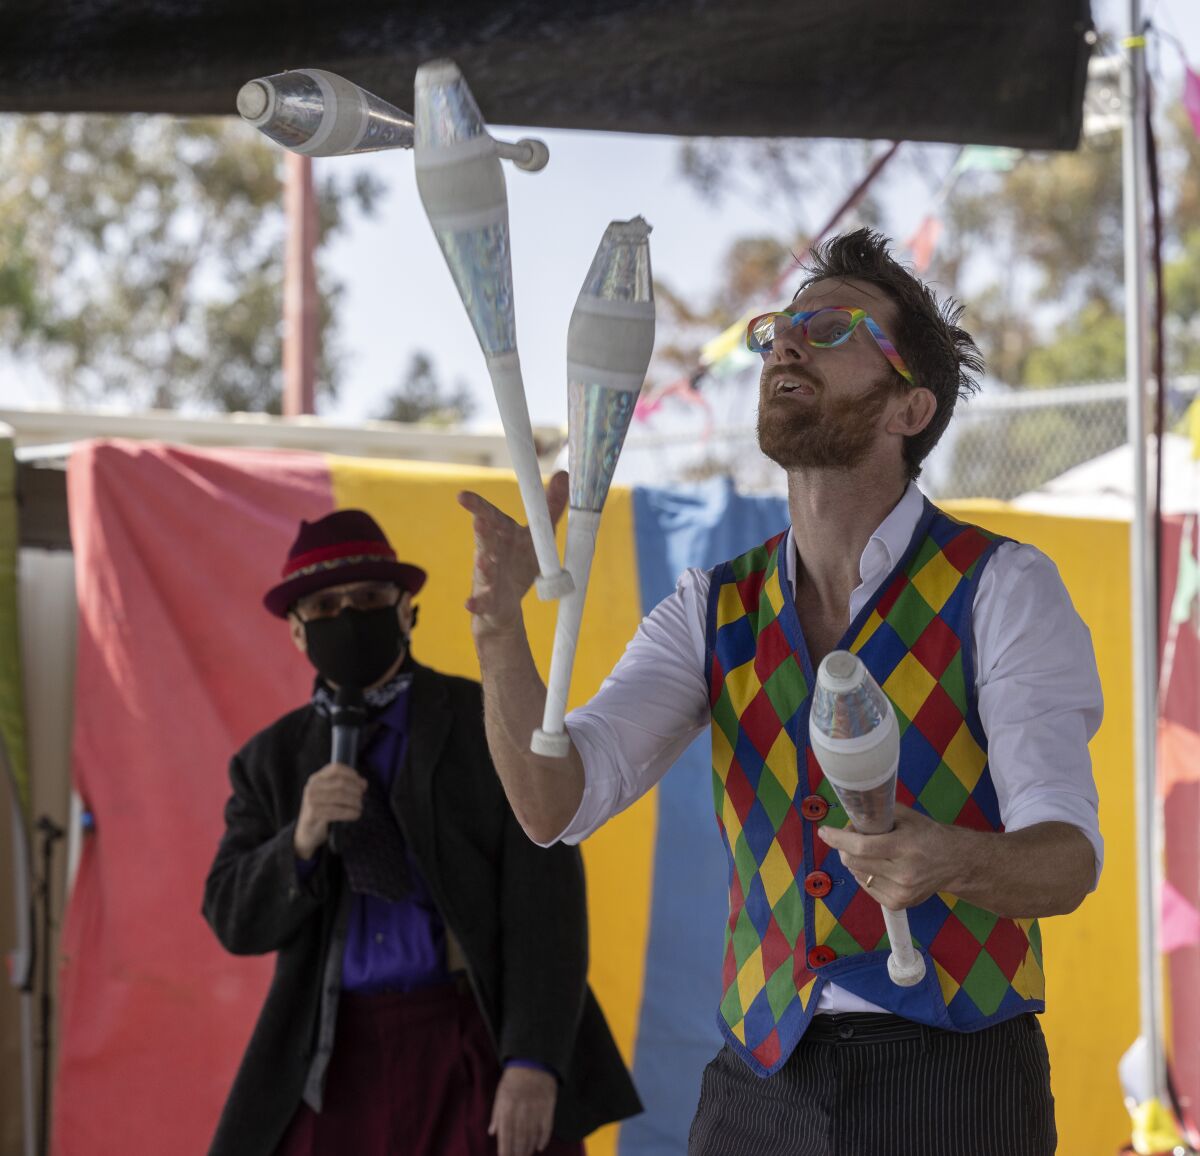 A juggler who goes by Mr. Orbit performs during the Fern Street Circus show last year in City Heights.